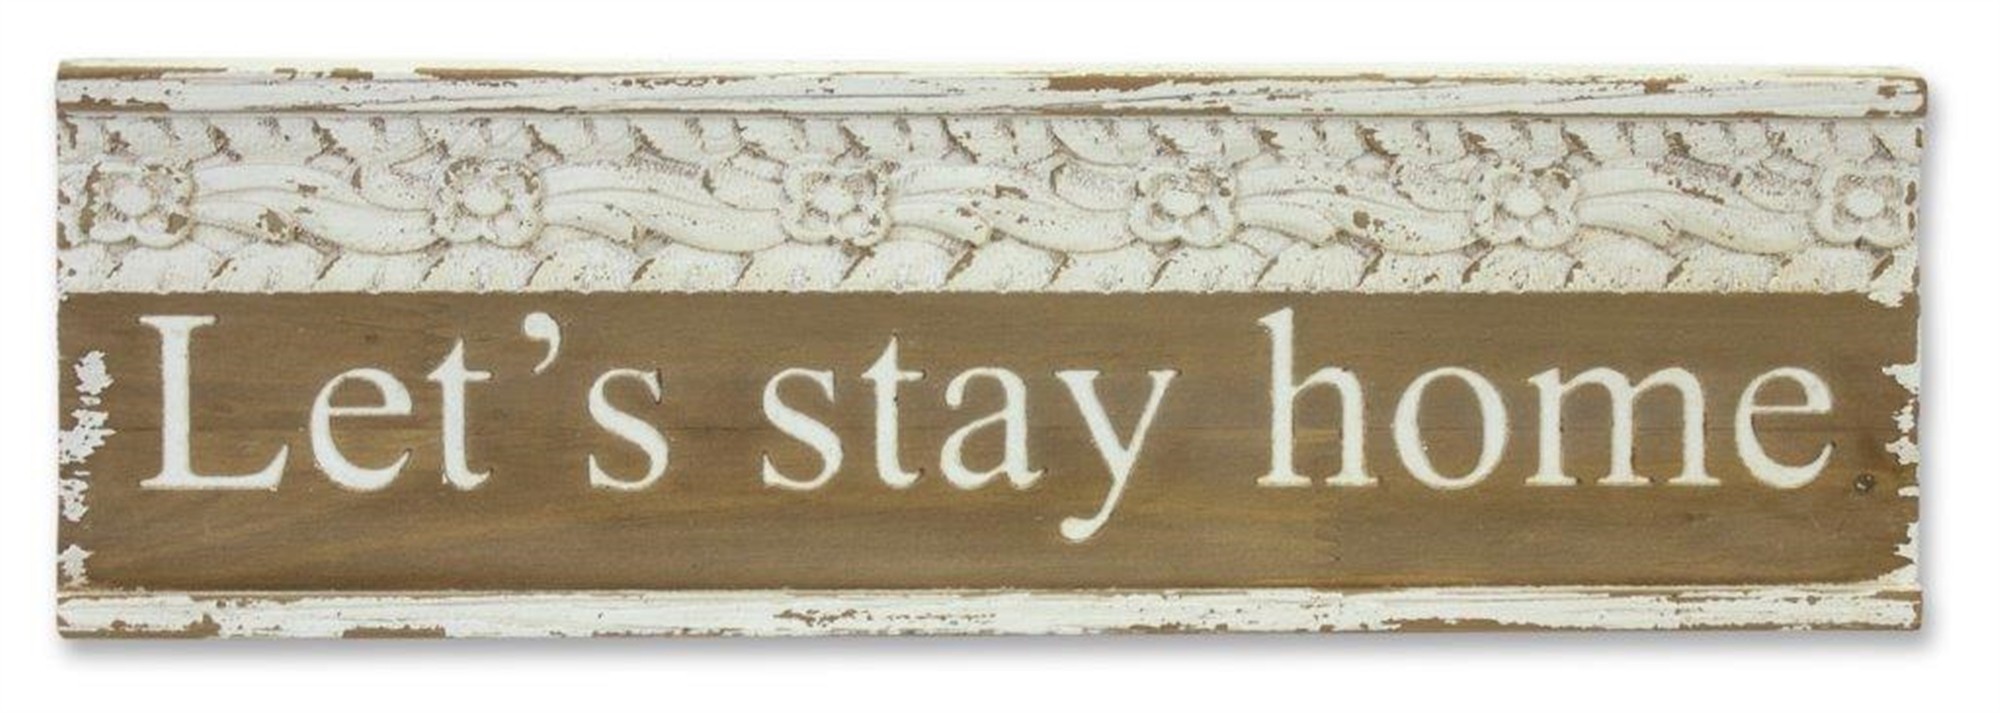 Let's Stay Home Plaque 19.25"L x 6"H Wood